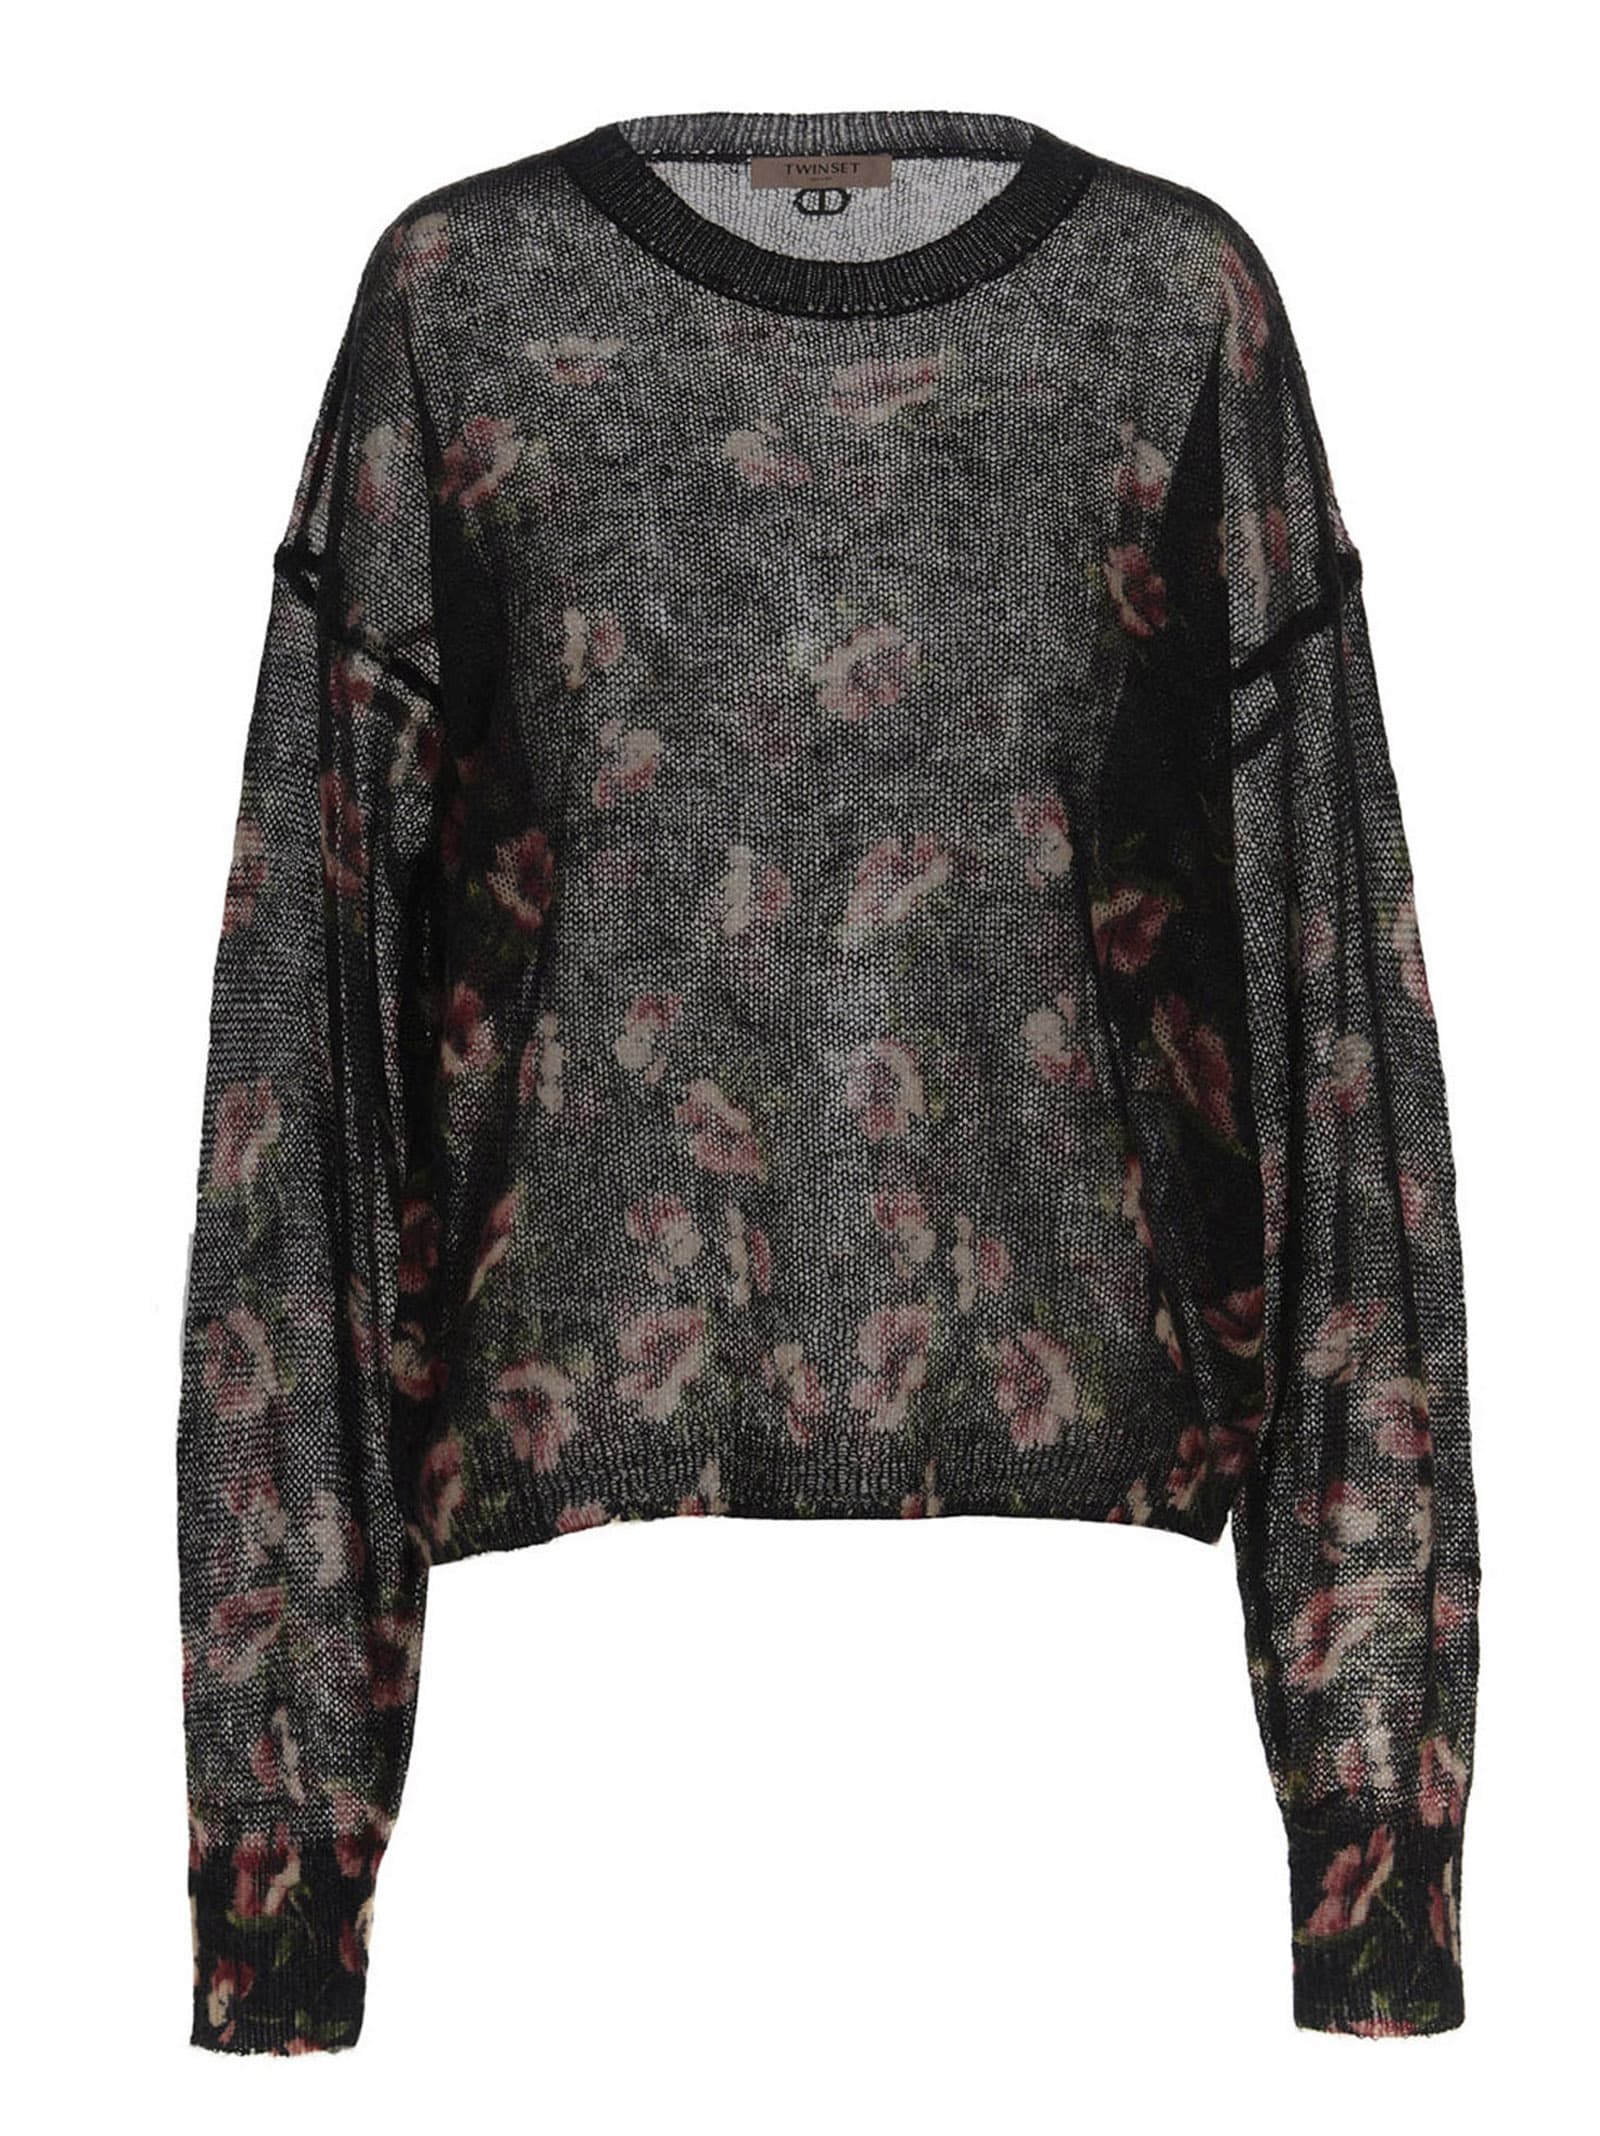 TwinSet Floral Jacquard Sweater